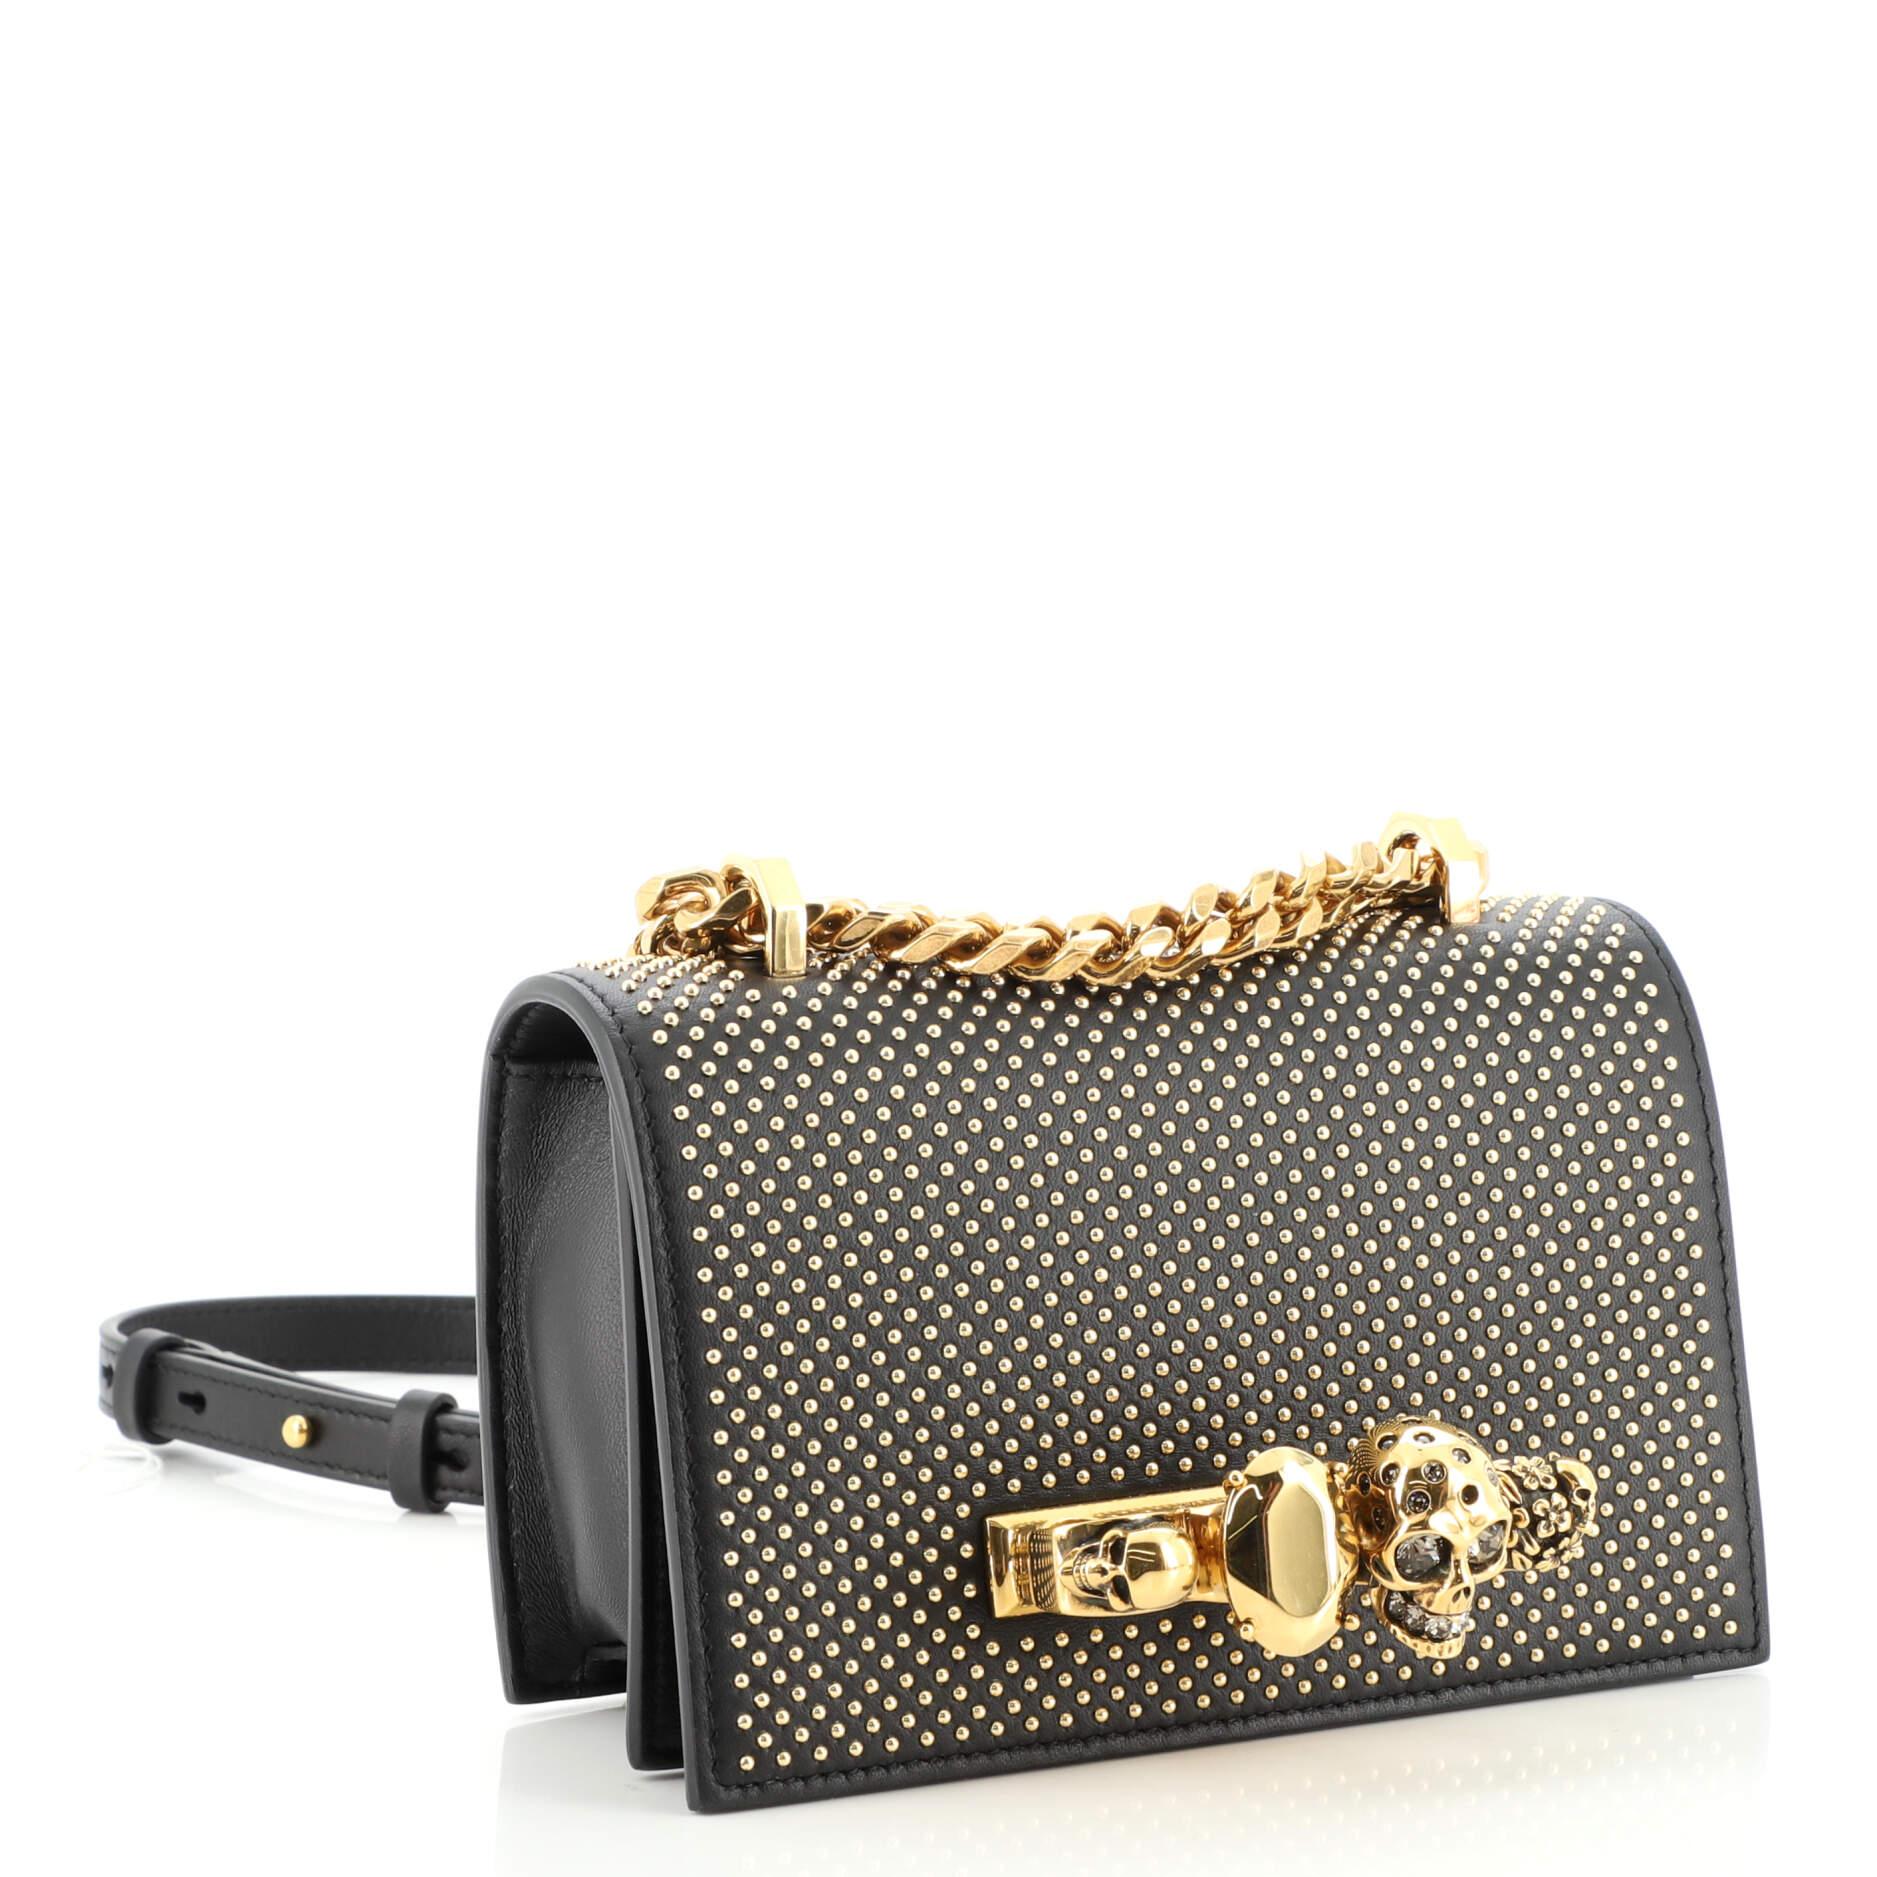 Black Alexander McQueen Jewelled Flap Satchel Studded Leather Small